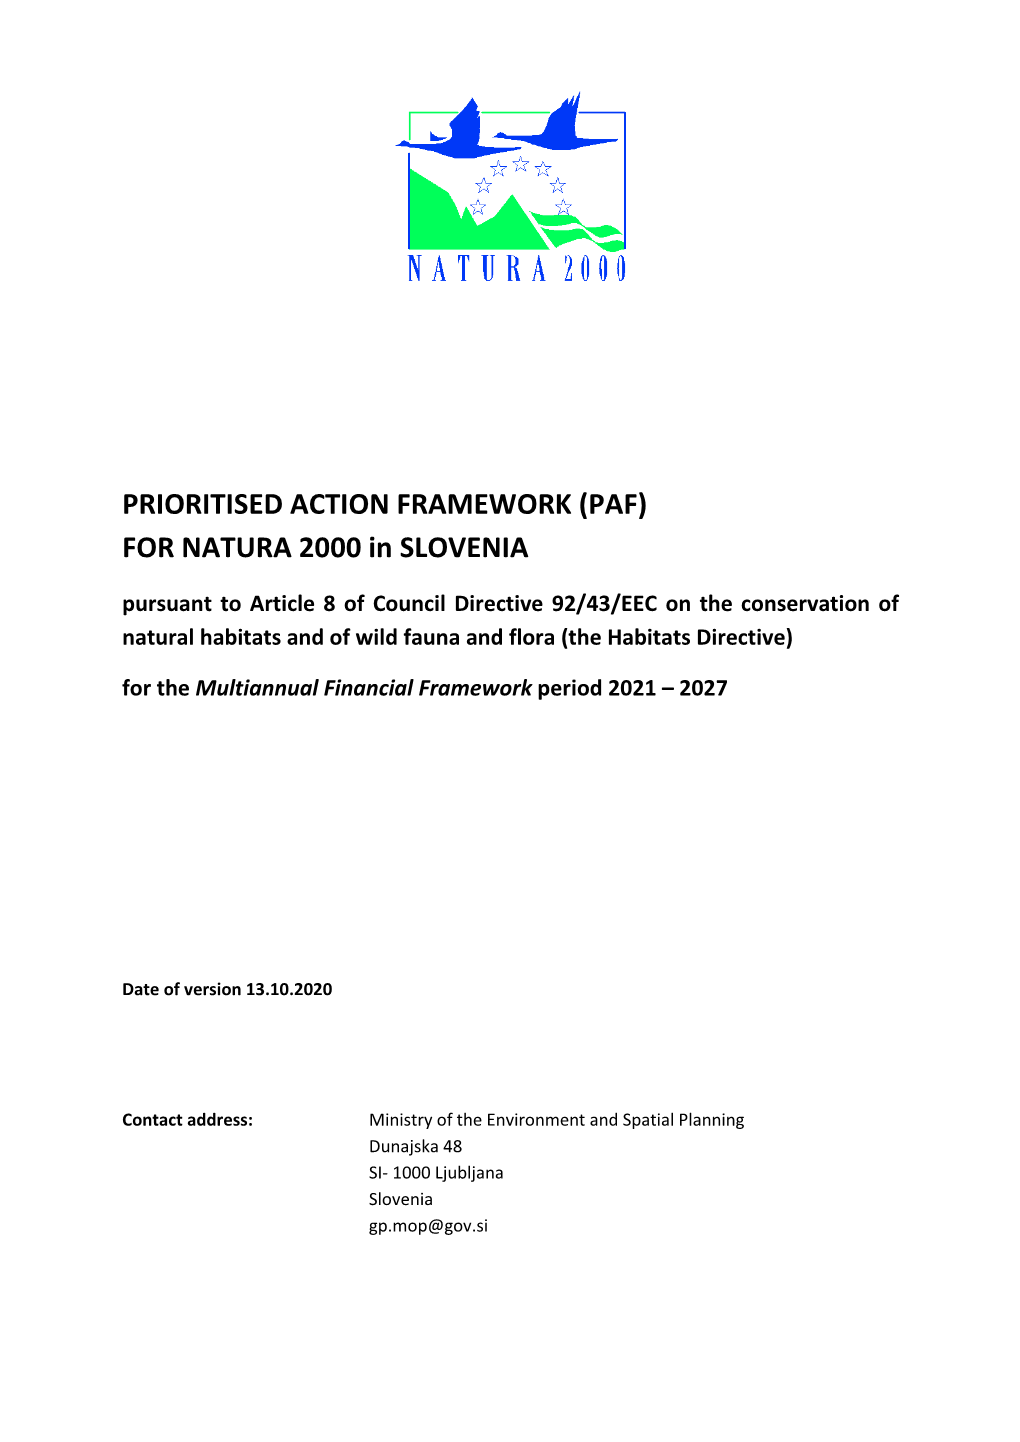 PRIORITISED ACTION FRAMEWORK (PAF) for NATURA 2000 In